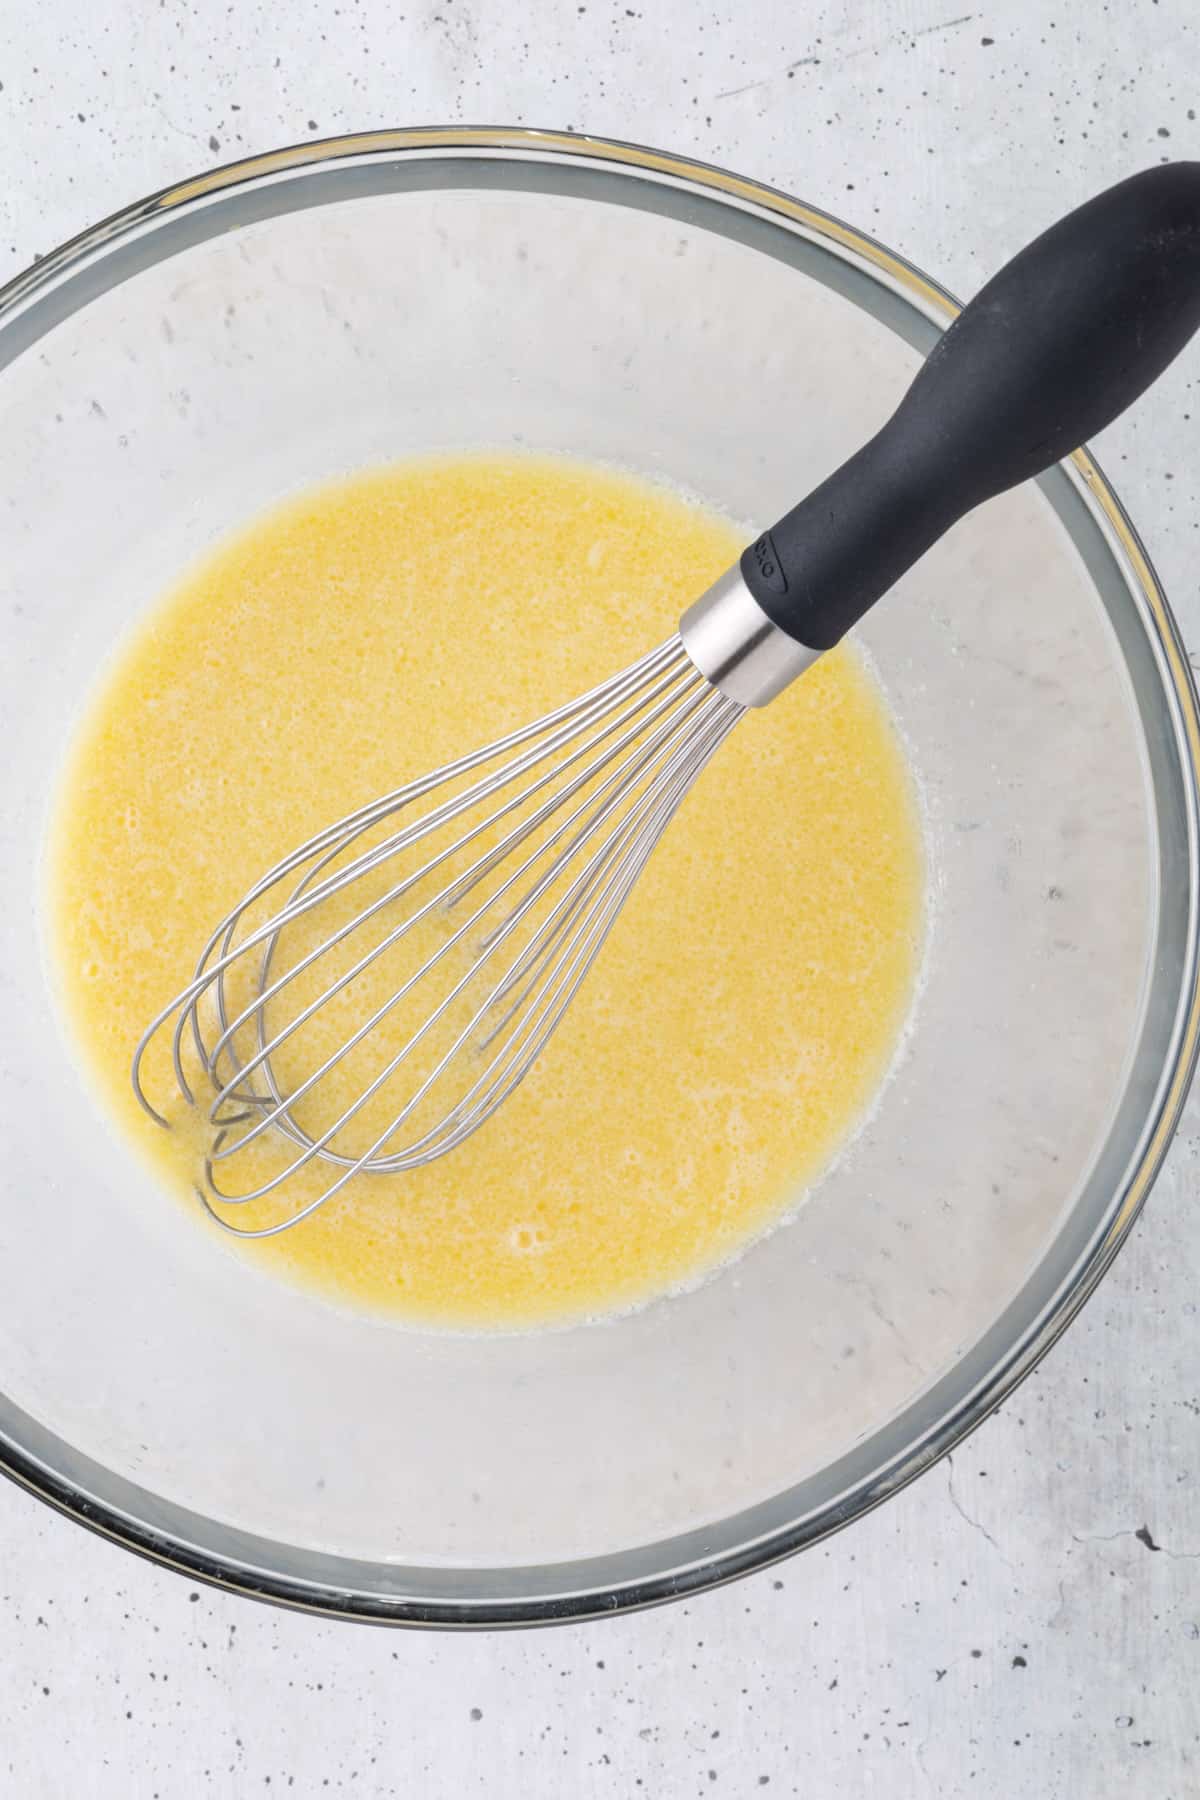 The liquid ingredients in a large bowl with a large whisk.